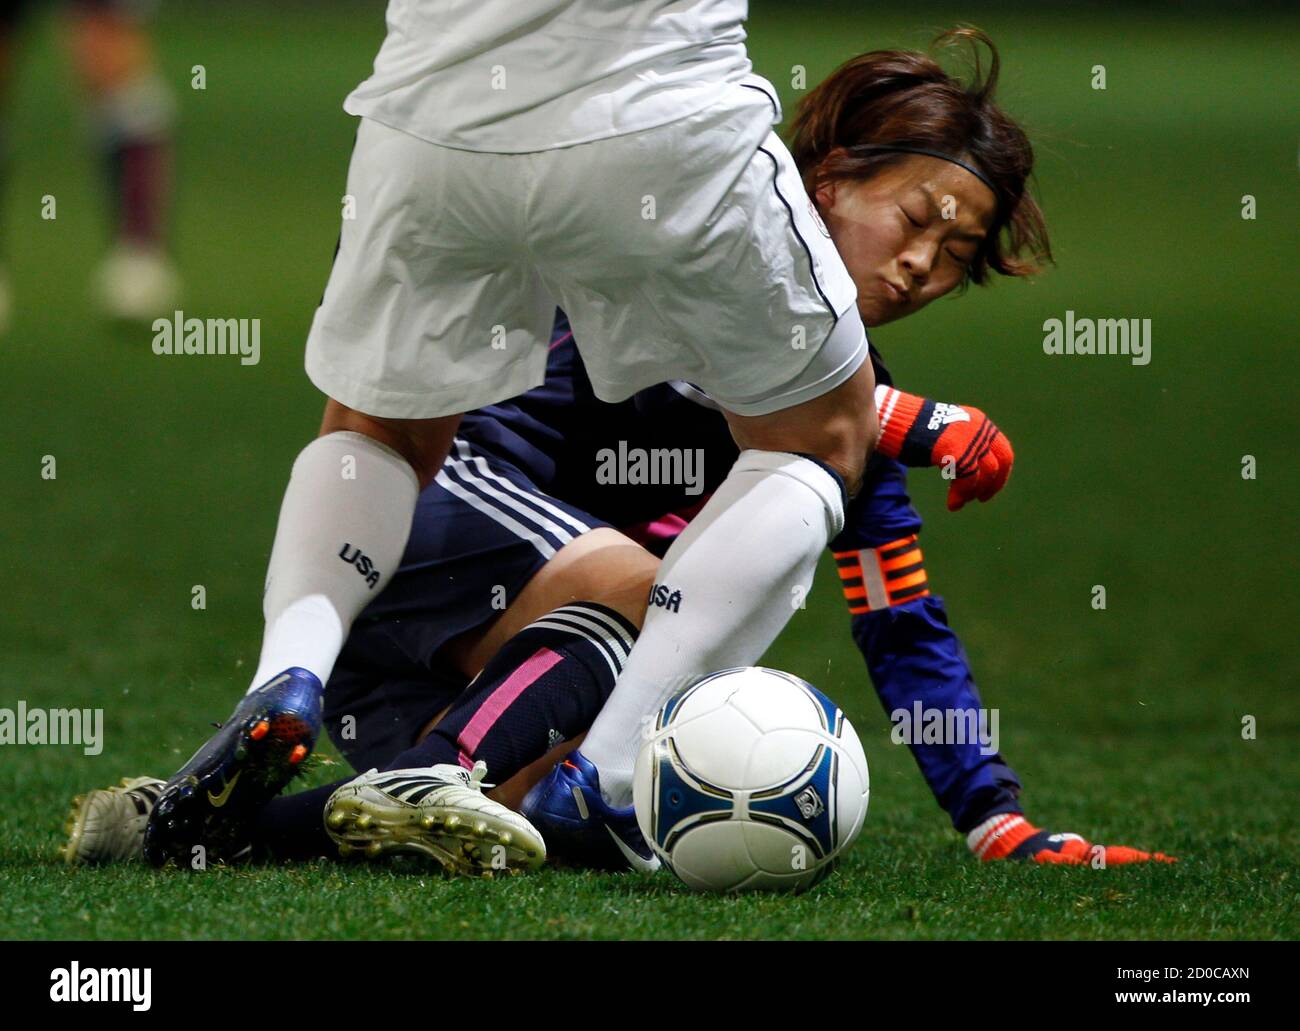 Aya Miyama (back) of Japan and Amy Lepeilbet of the U.S. fight for the ball during their women's friendly soccer match in Sendai, Miyagi prefecture, April 1, 2012. World Cup holders Japan were held 1-1 by the United States in a women's soccer friendly on Sunday, failing in their bid to beat the Olympic champions for the third time running. REUTERS/Issei Kato (JAPAN - Tags: SPORT SOCCER) Stock Photo